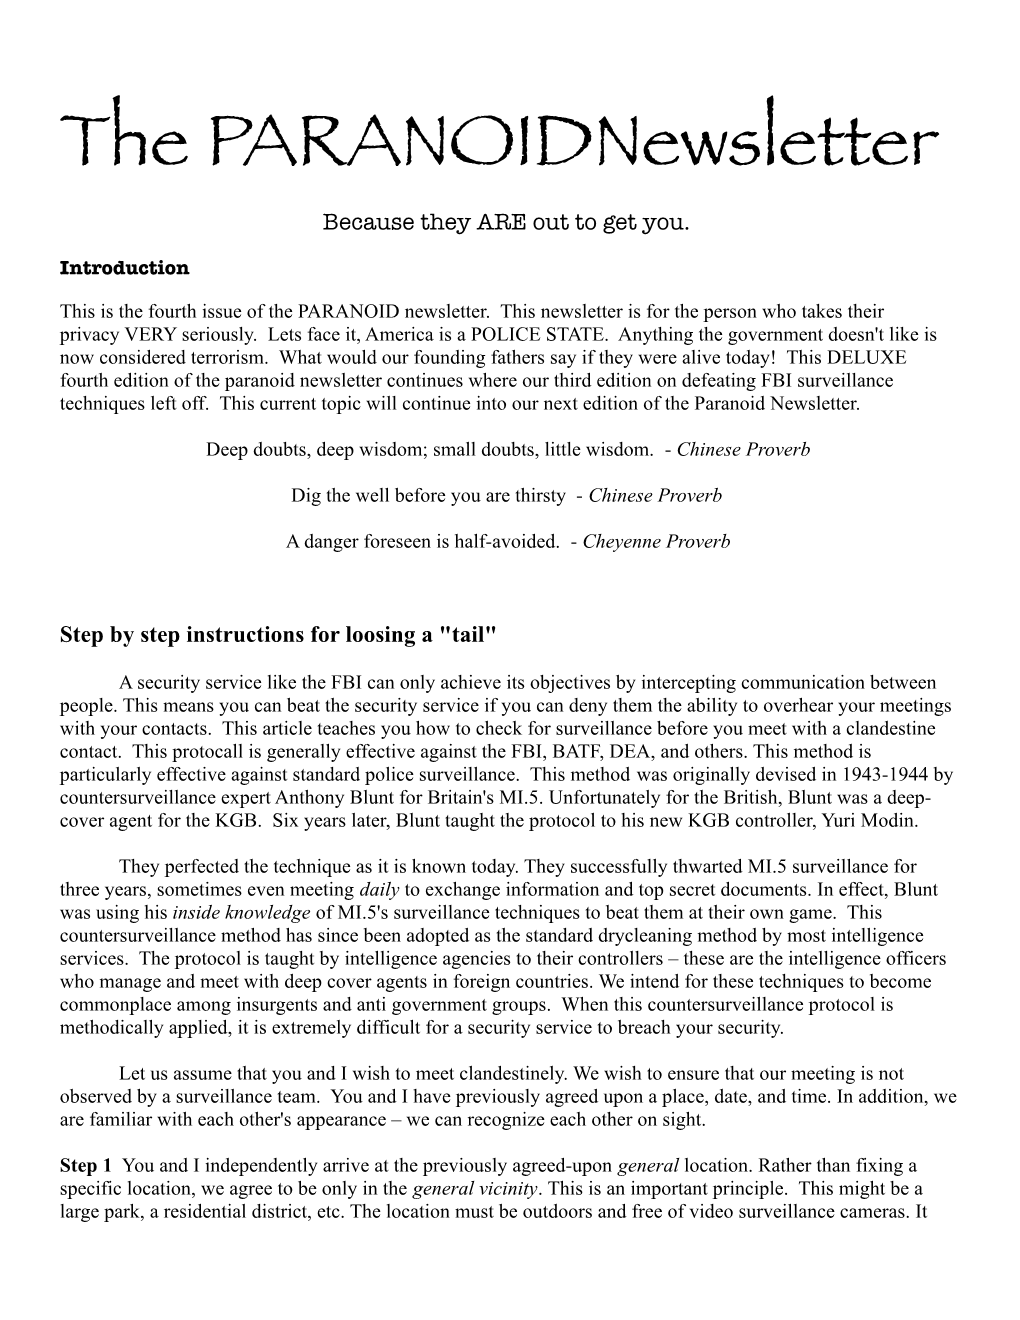 The Paranoidnewsletter Because They ARE out to Get You